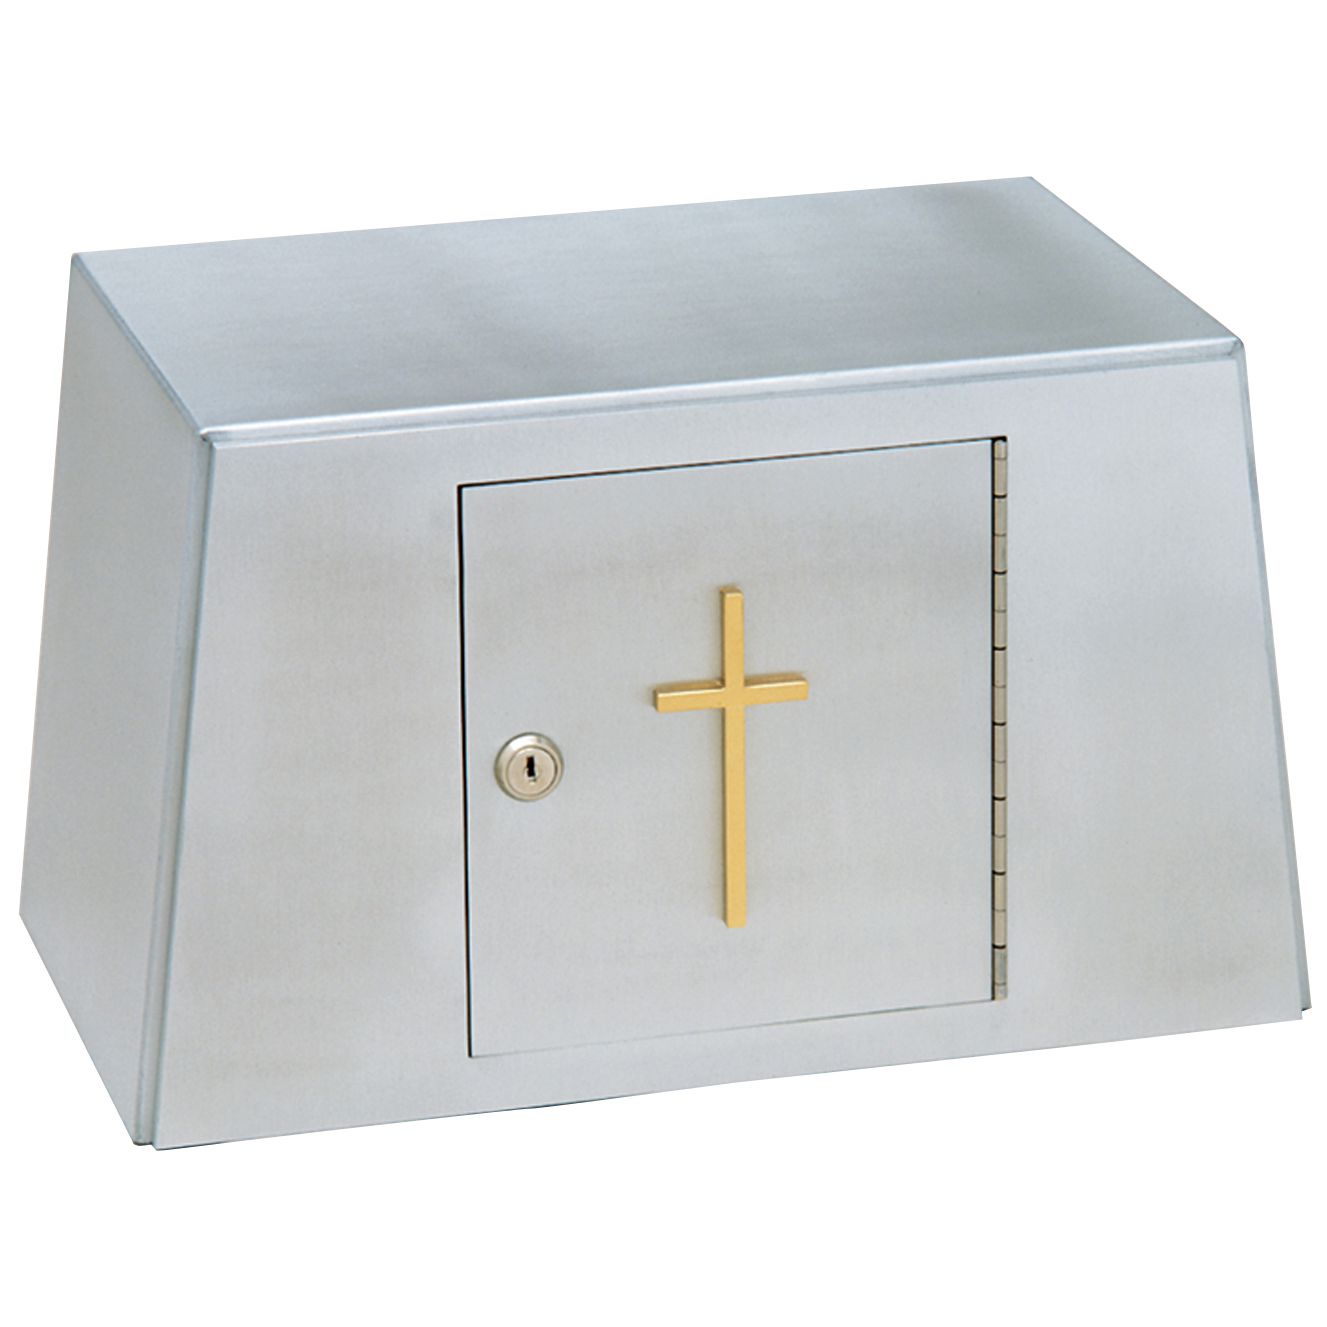 K334 Tabernacle Aluminum with Bright Brass Cross